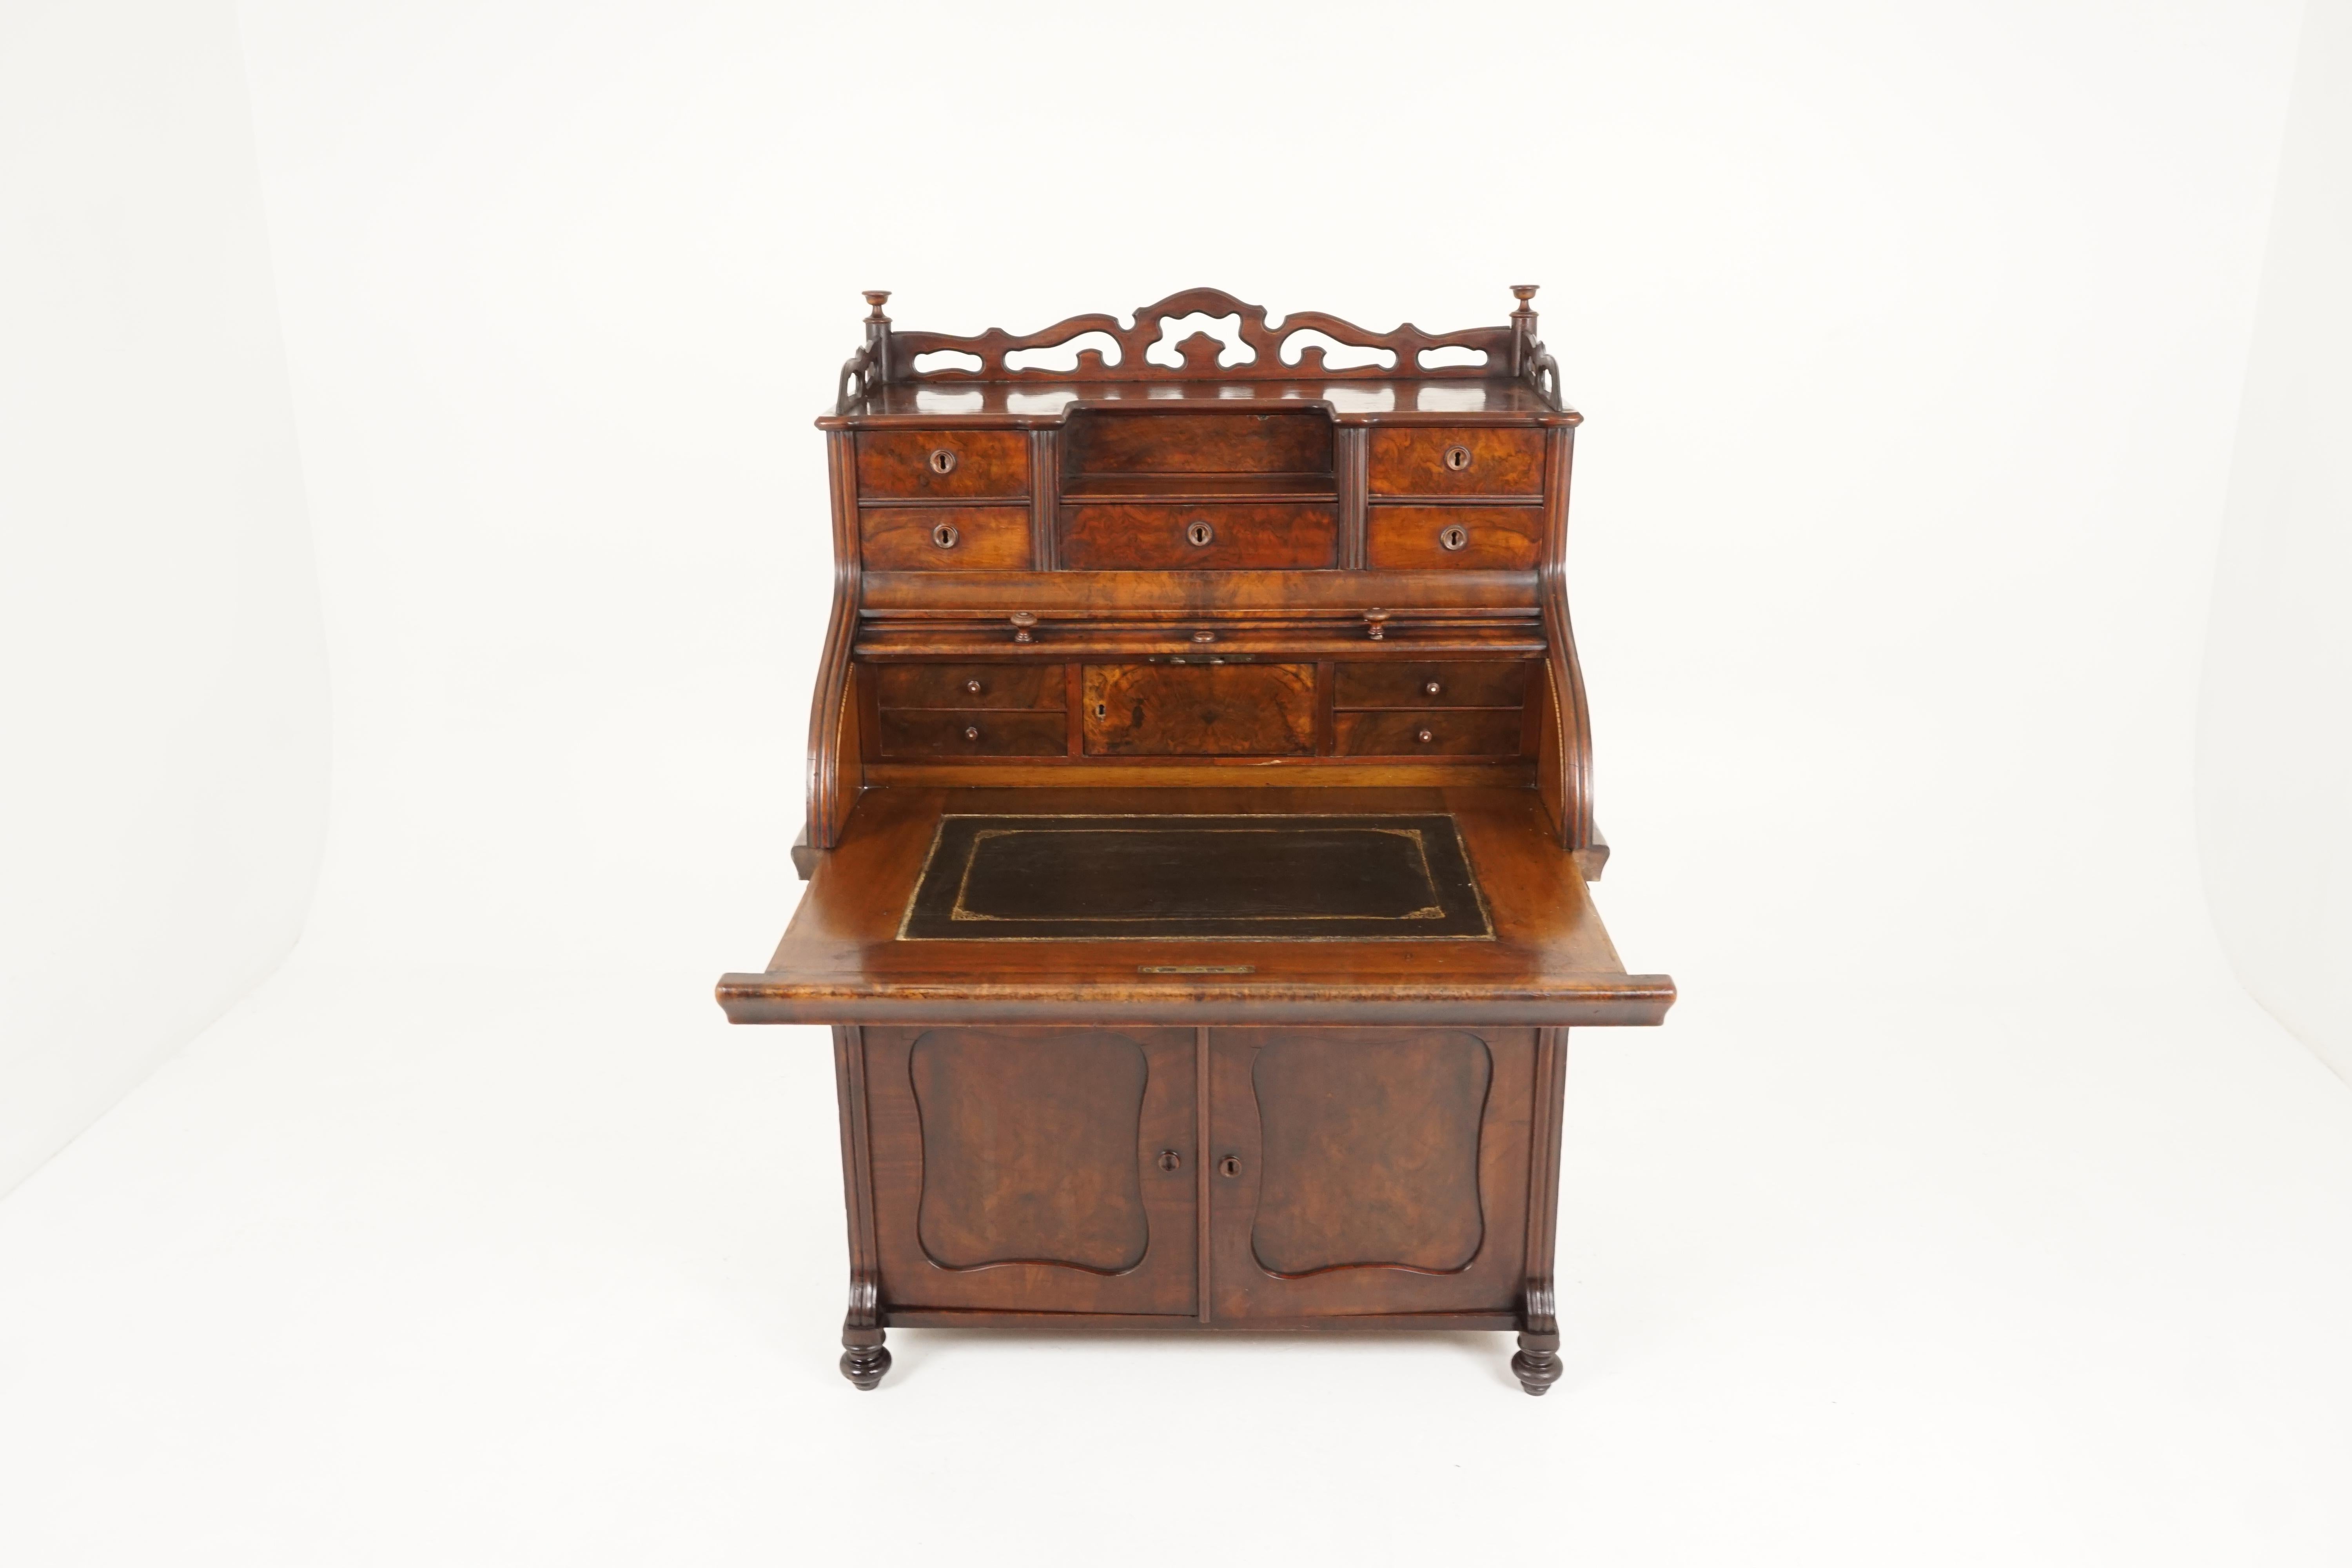 Antique 19th century Biedermeier roll top walnut secrétaire, writing desk, continental 1870, B2257

Continental, 1970
Solid walnut and veneer
Original finish
Three quarter open gallery on top
Five drawers and a center door with secret opening device